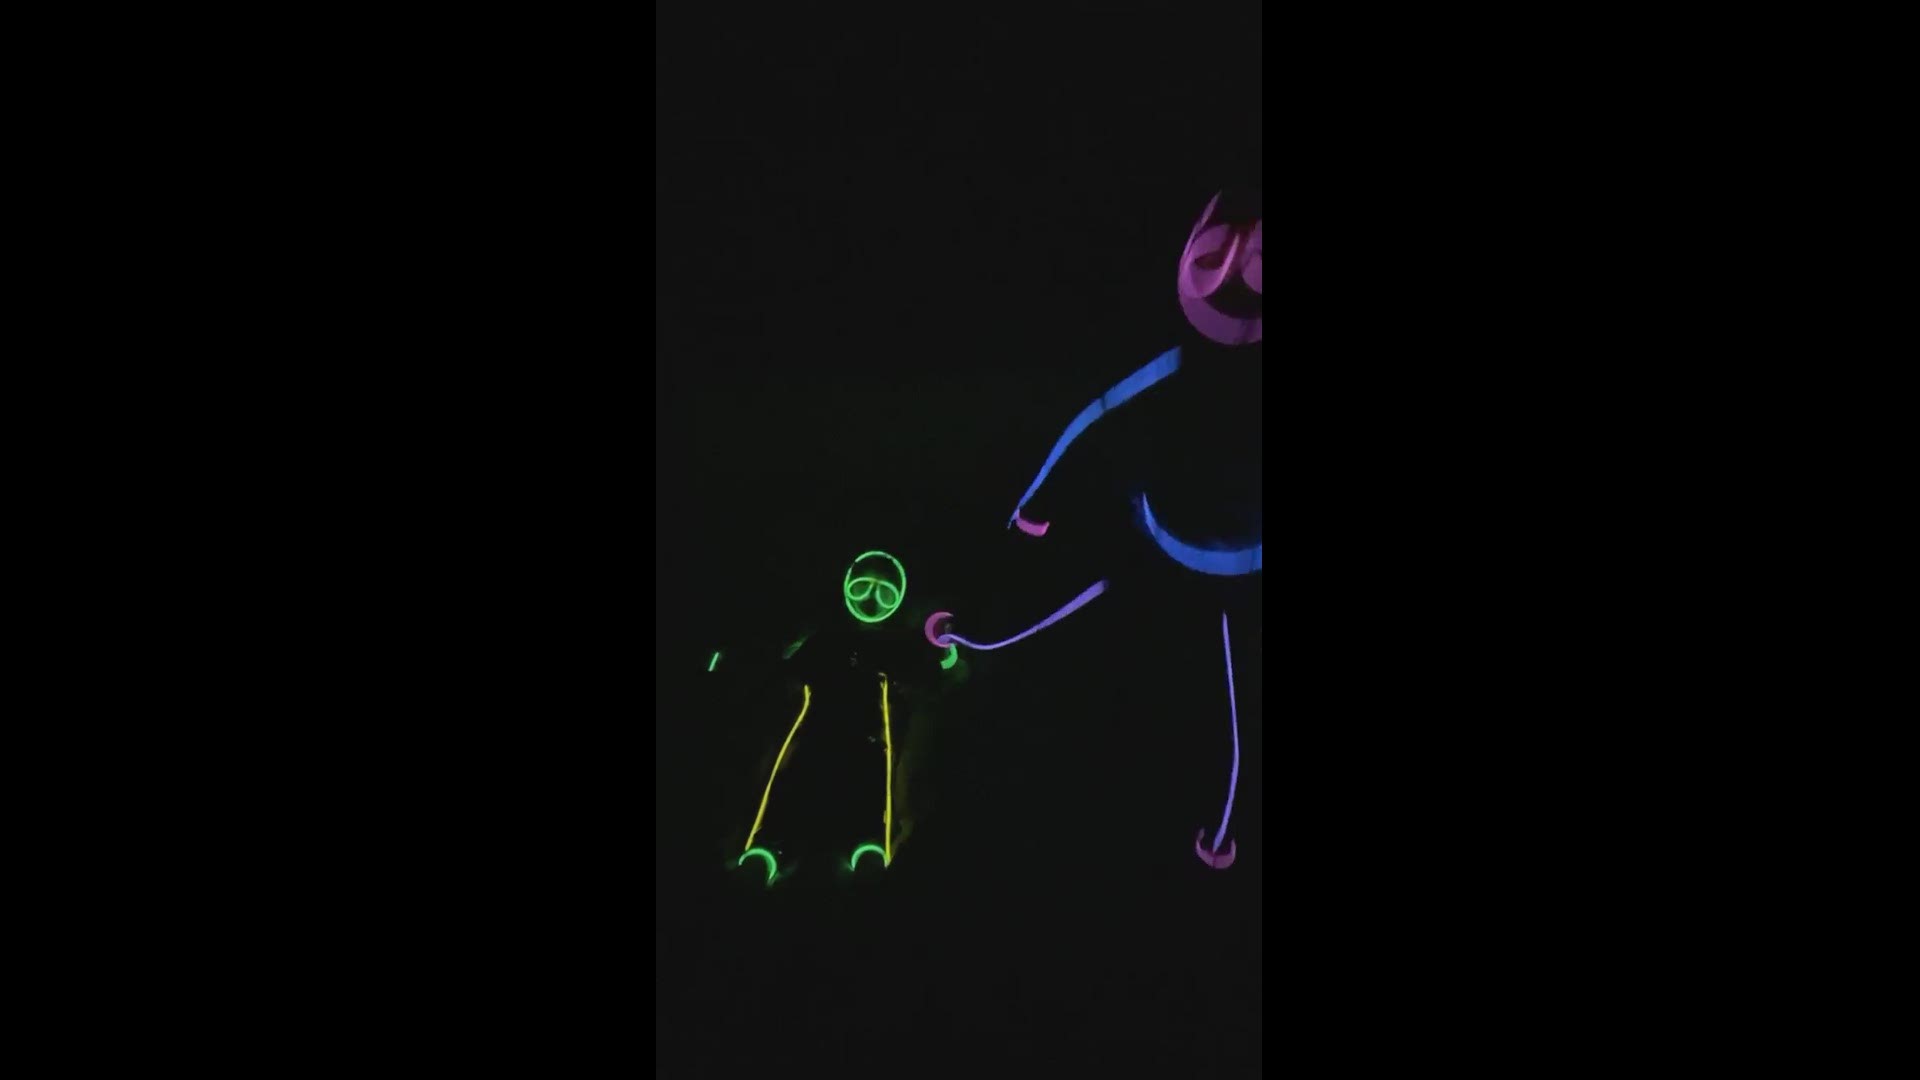 Dancing in the dark with glow sticks